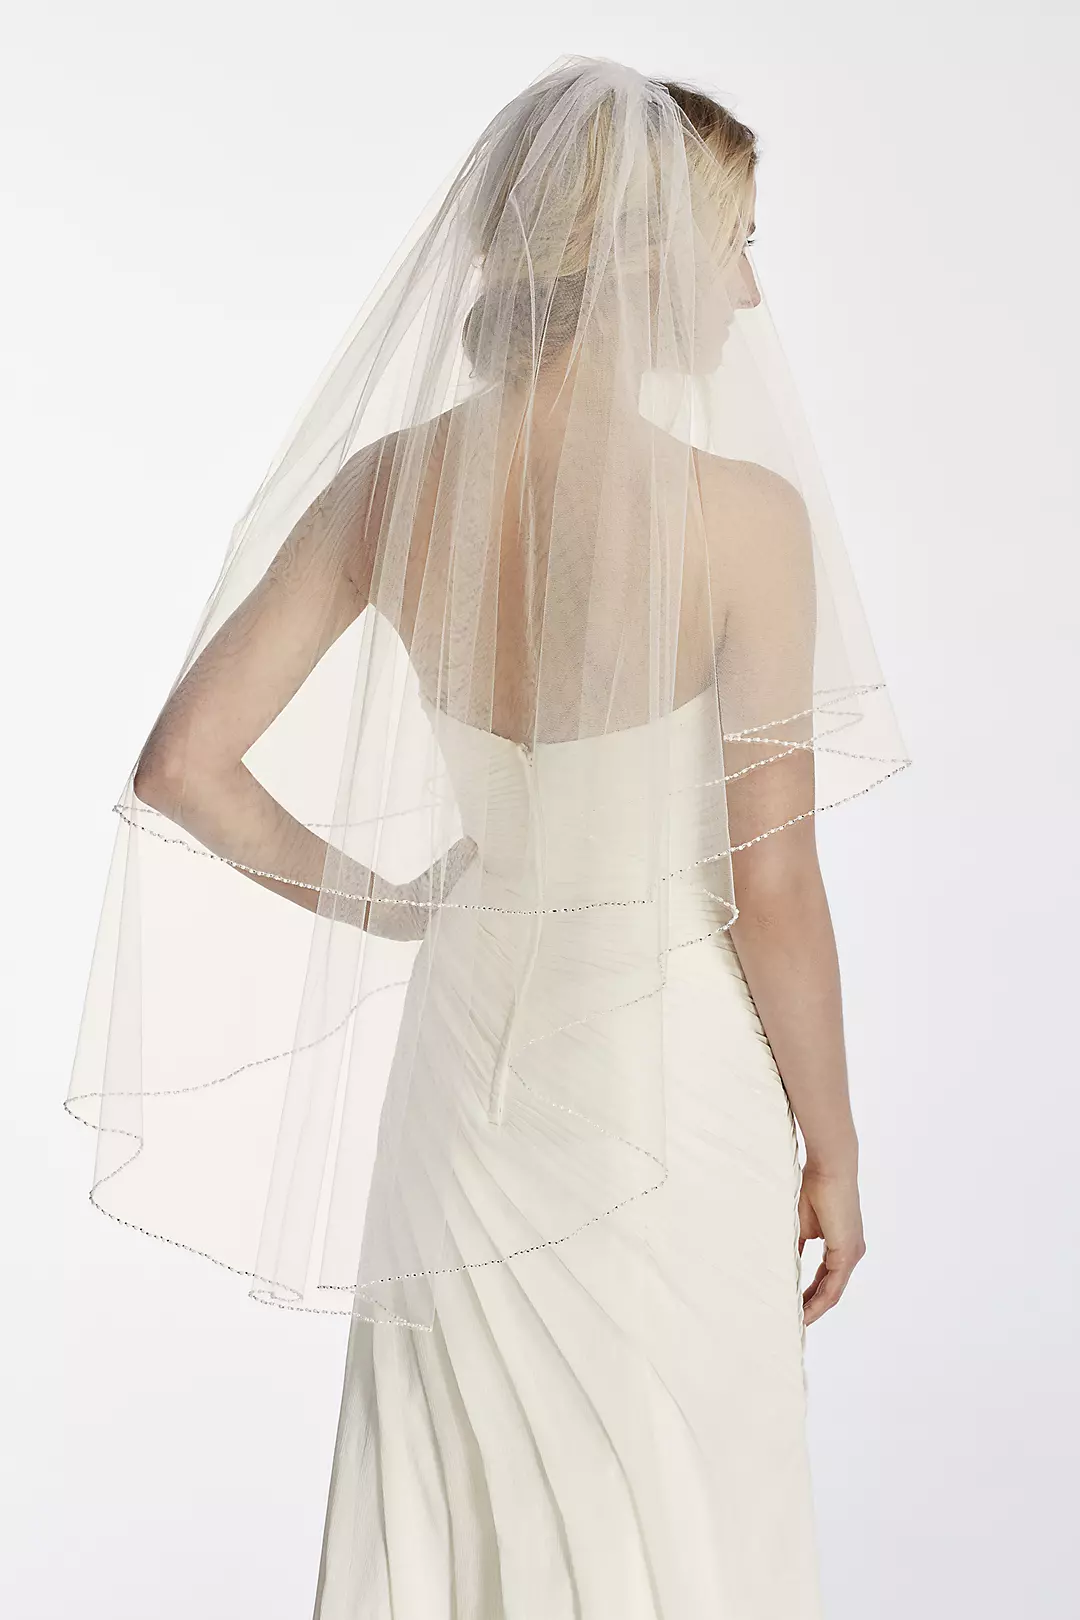 Two Tier Mid Length Veil with Pearl Edge Image